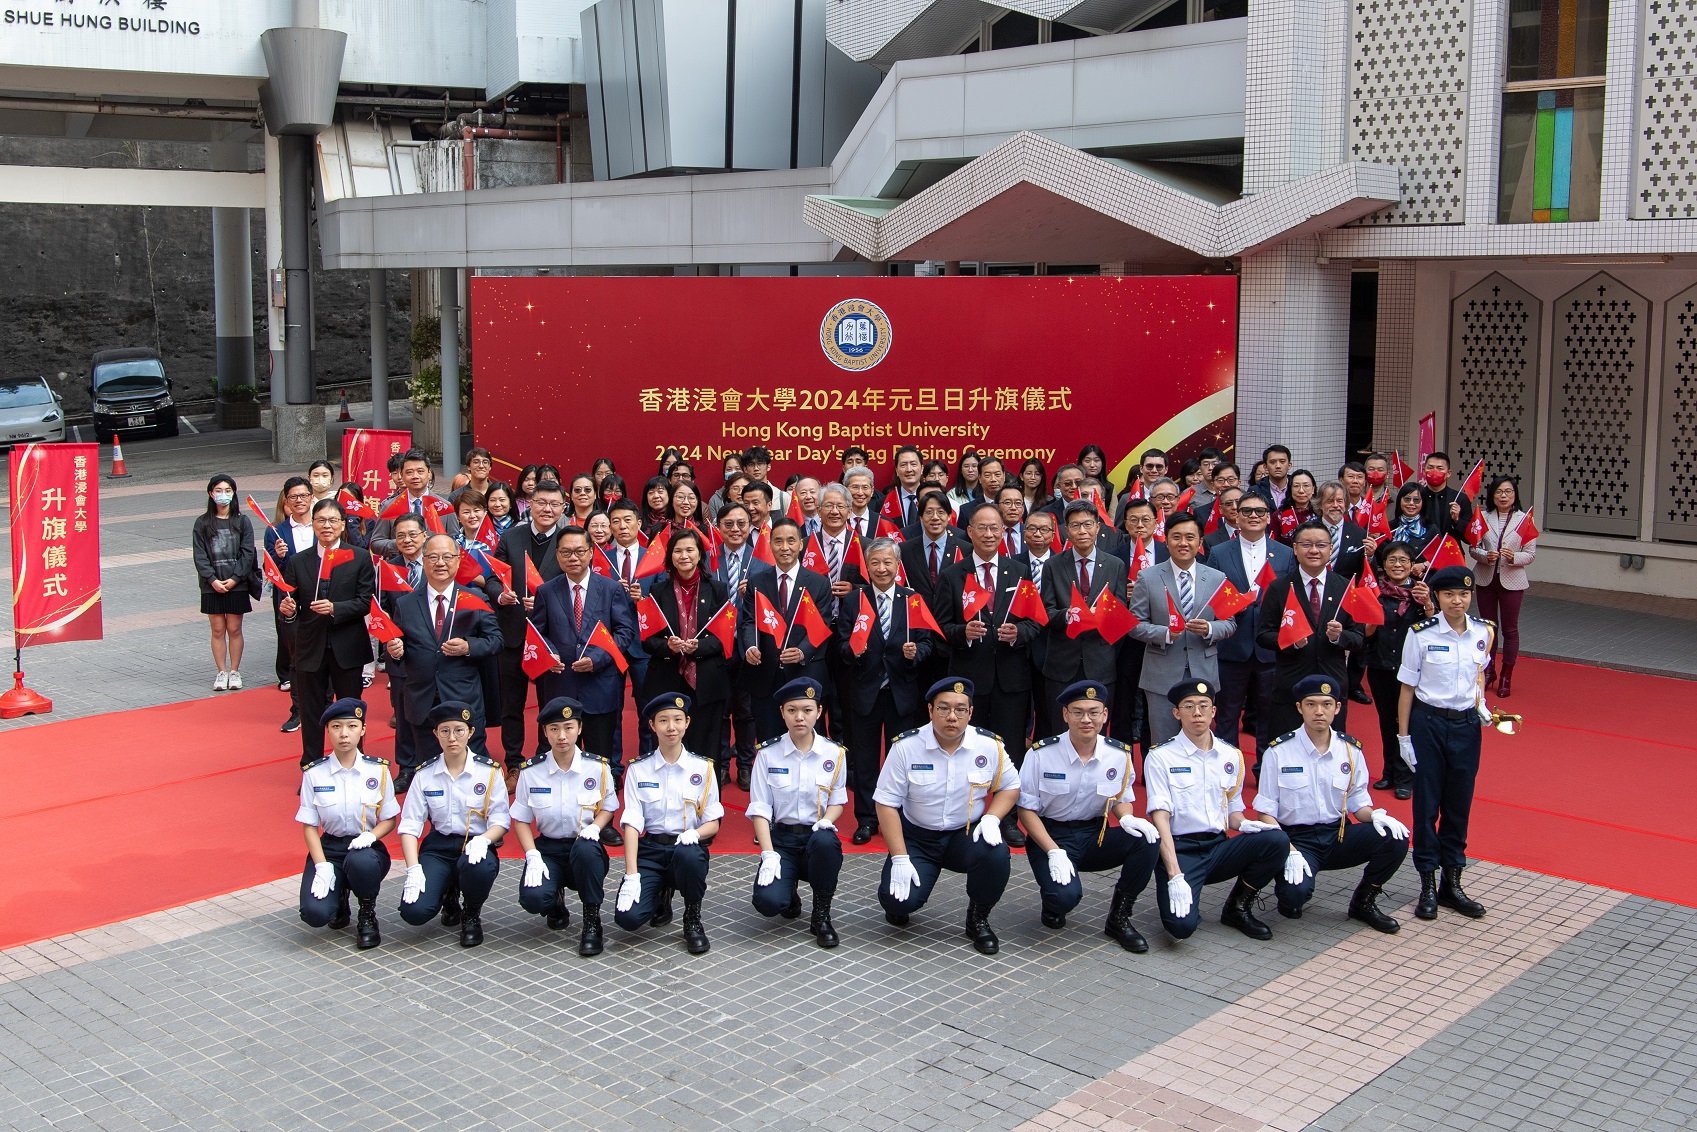 Participants of the flag-raising ceremony include Mr Paul Poon, Deputy Chairman of the Council and the Court of HKBU(fifth right, second row); Professor Alexander Wai, President and Vice-Chancellor (fourth right, second row), a number of Council and senior management team members, as well as staff, alumni and students 